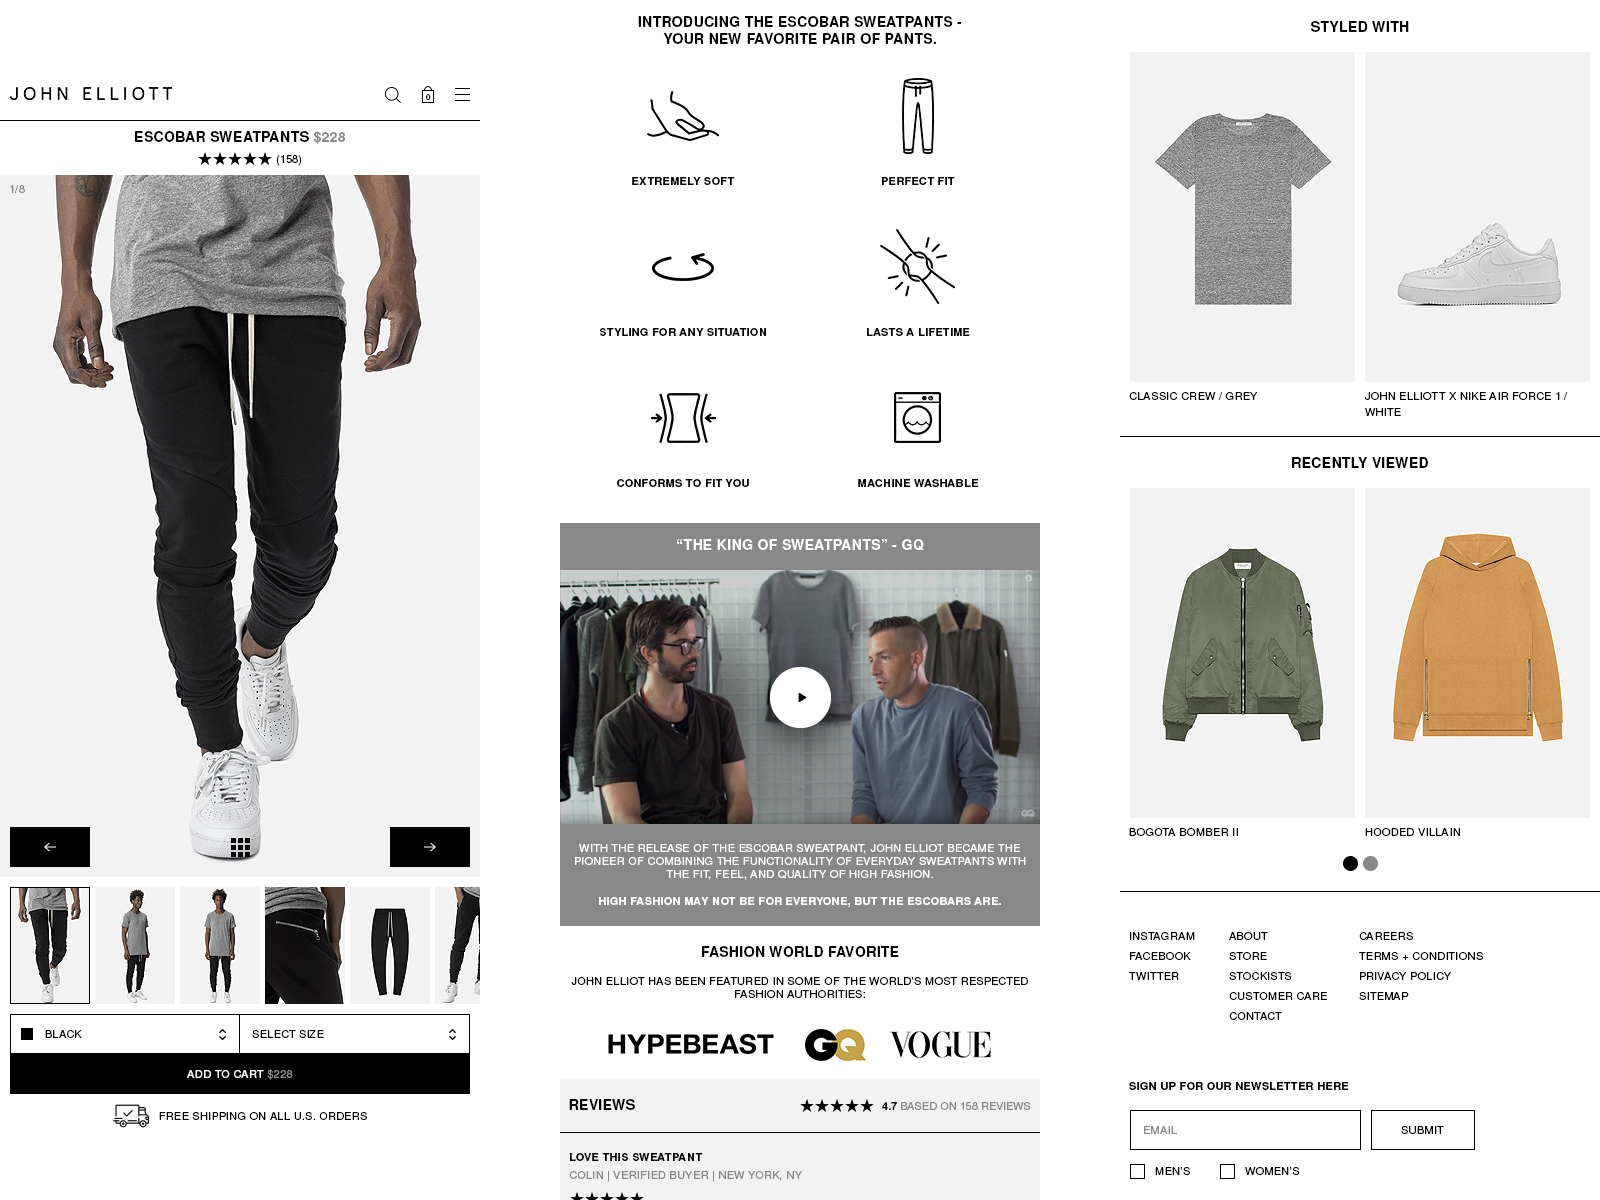 John Elliott - Product Page by Syed Hameed on Dribbble